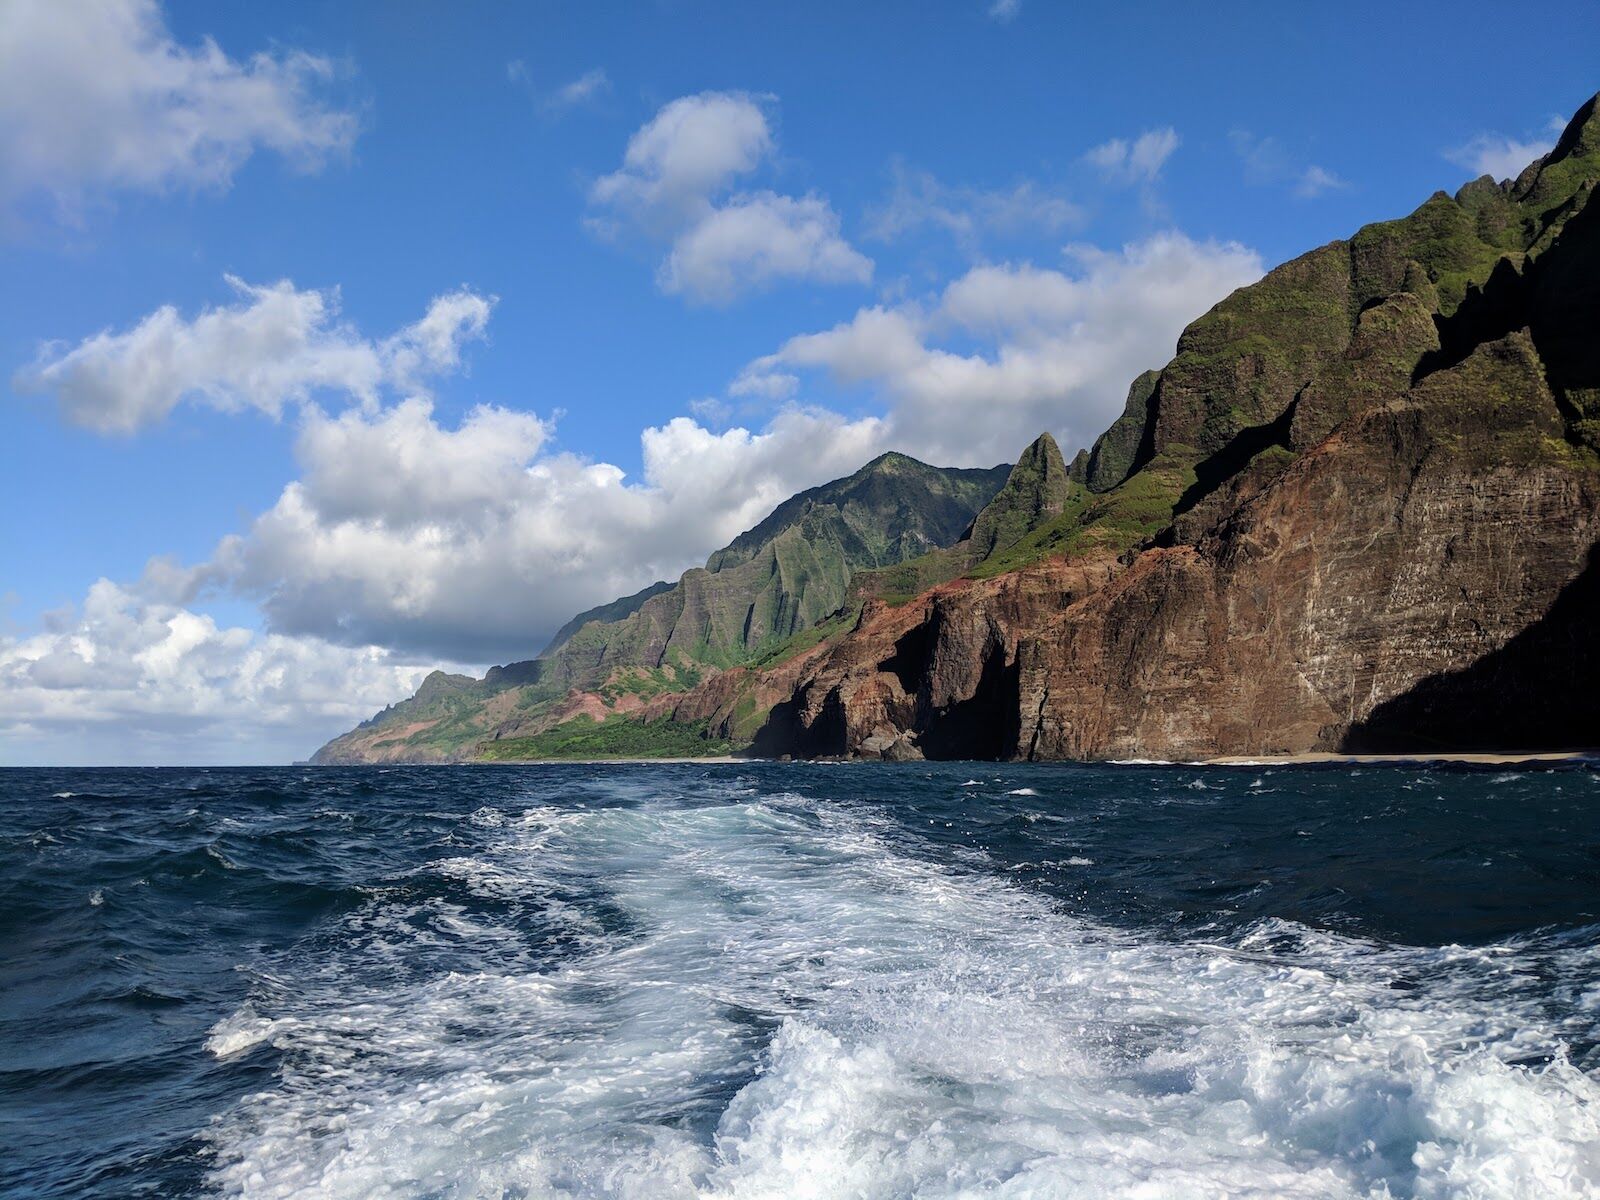 Niihau - view from back of boat tour headed to forbidden island